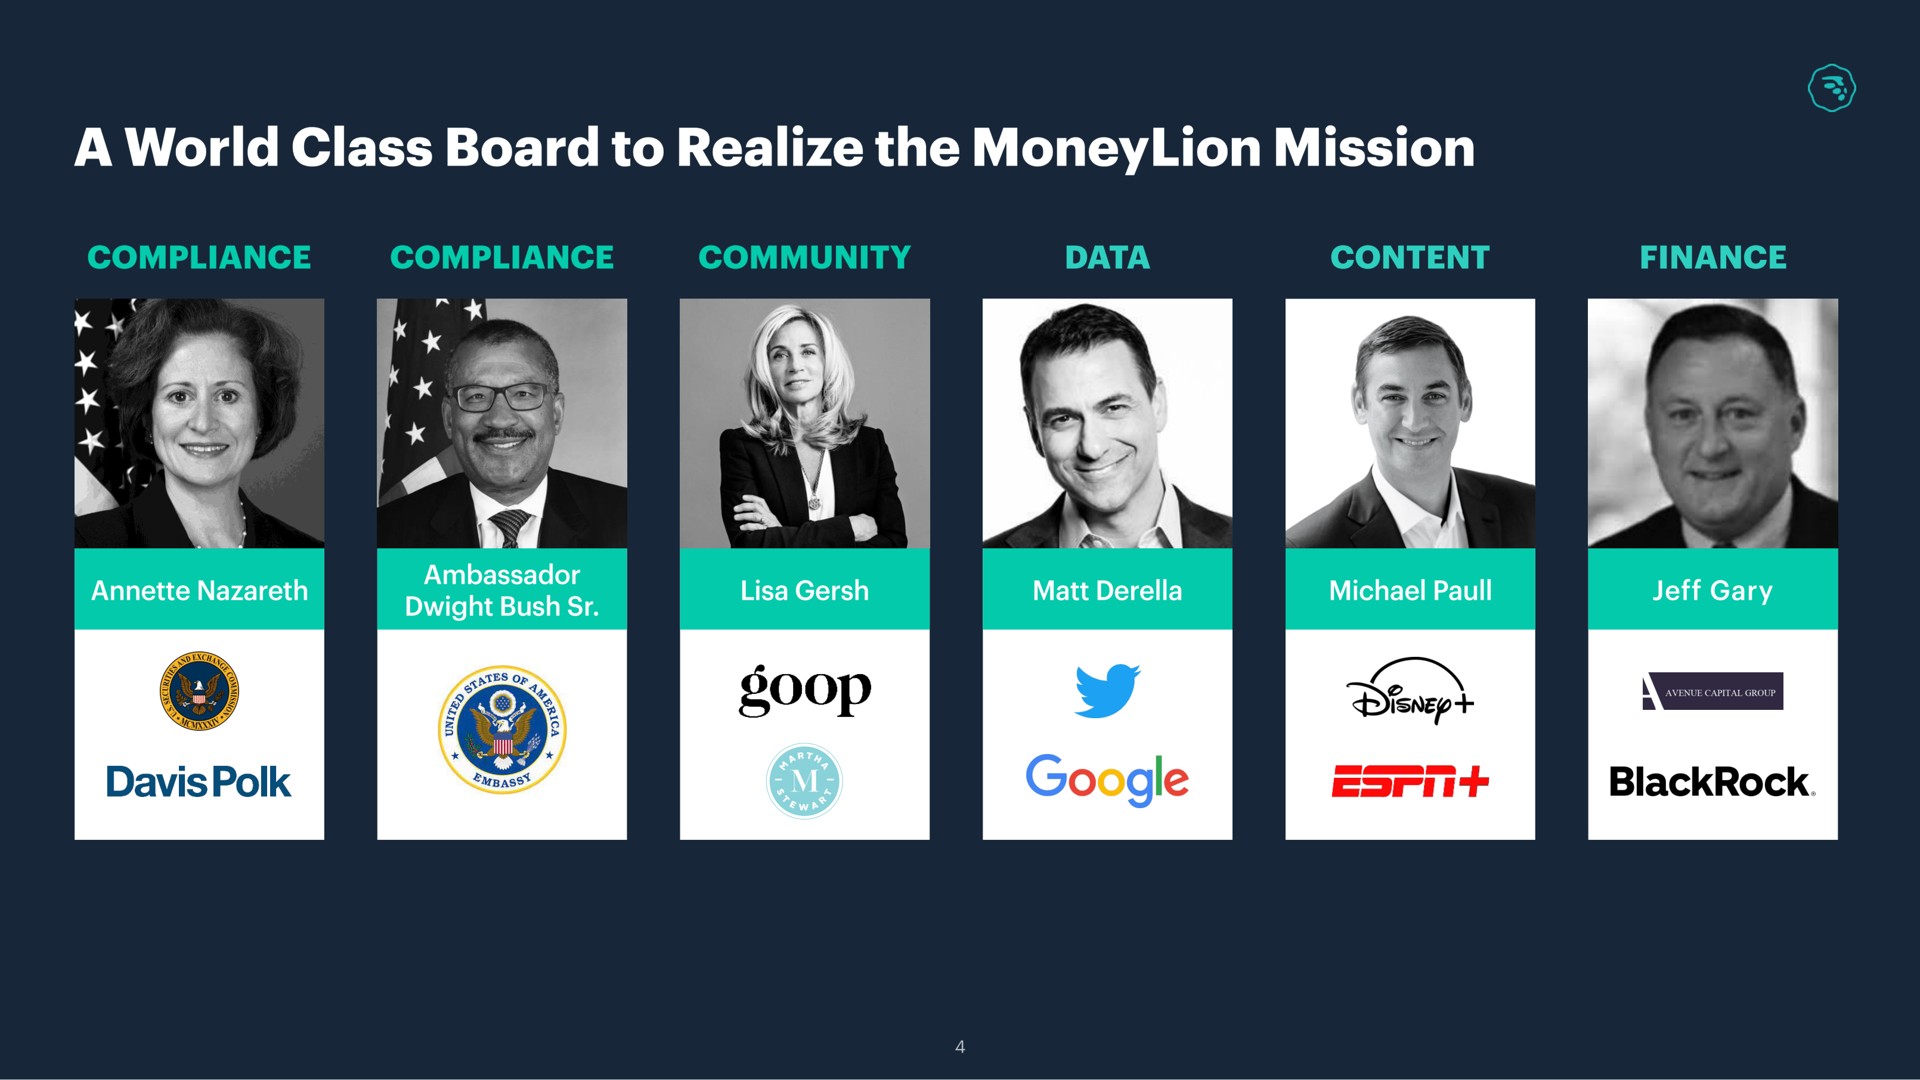 a world class board to realize the mission | MoneyLion